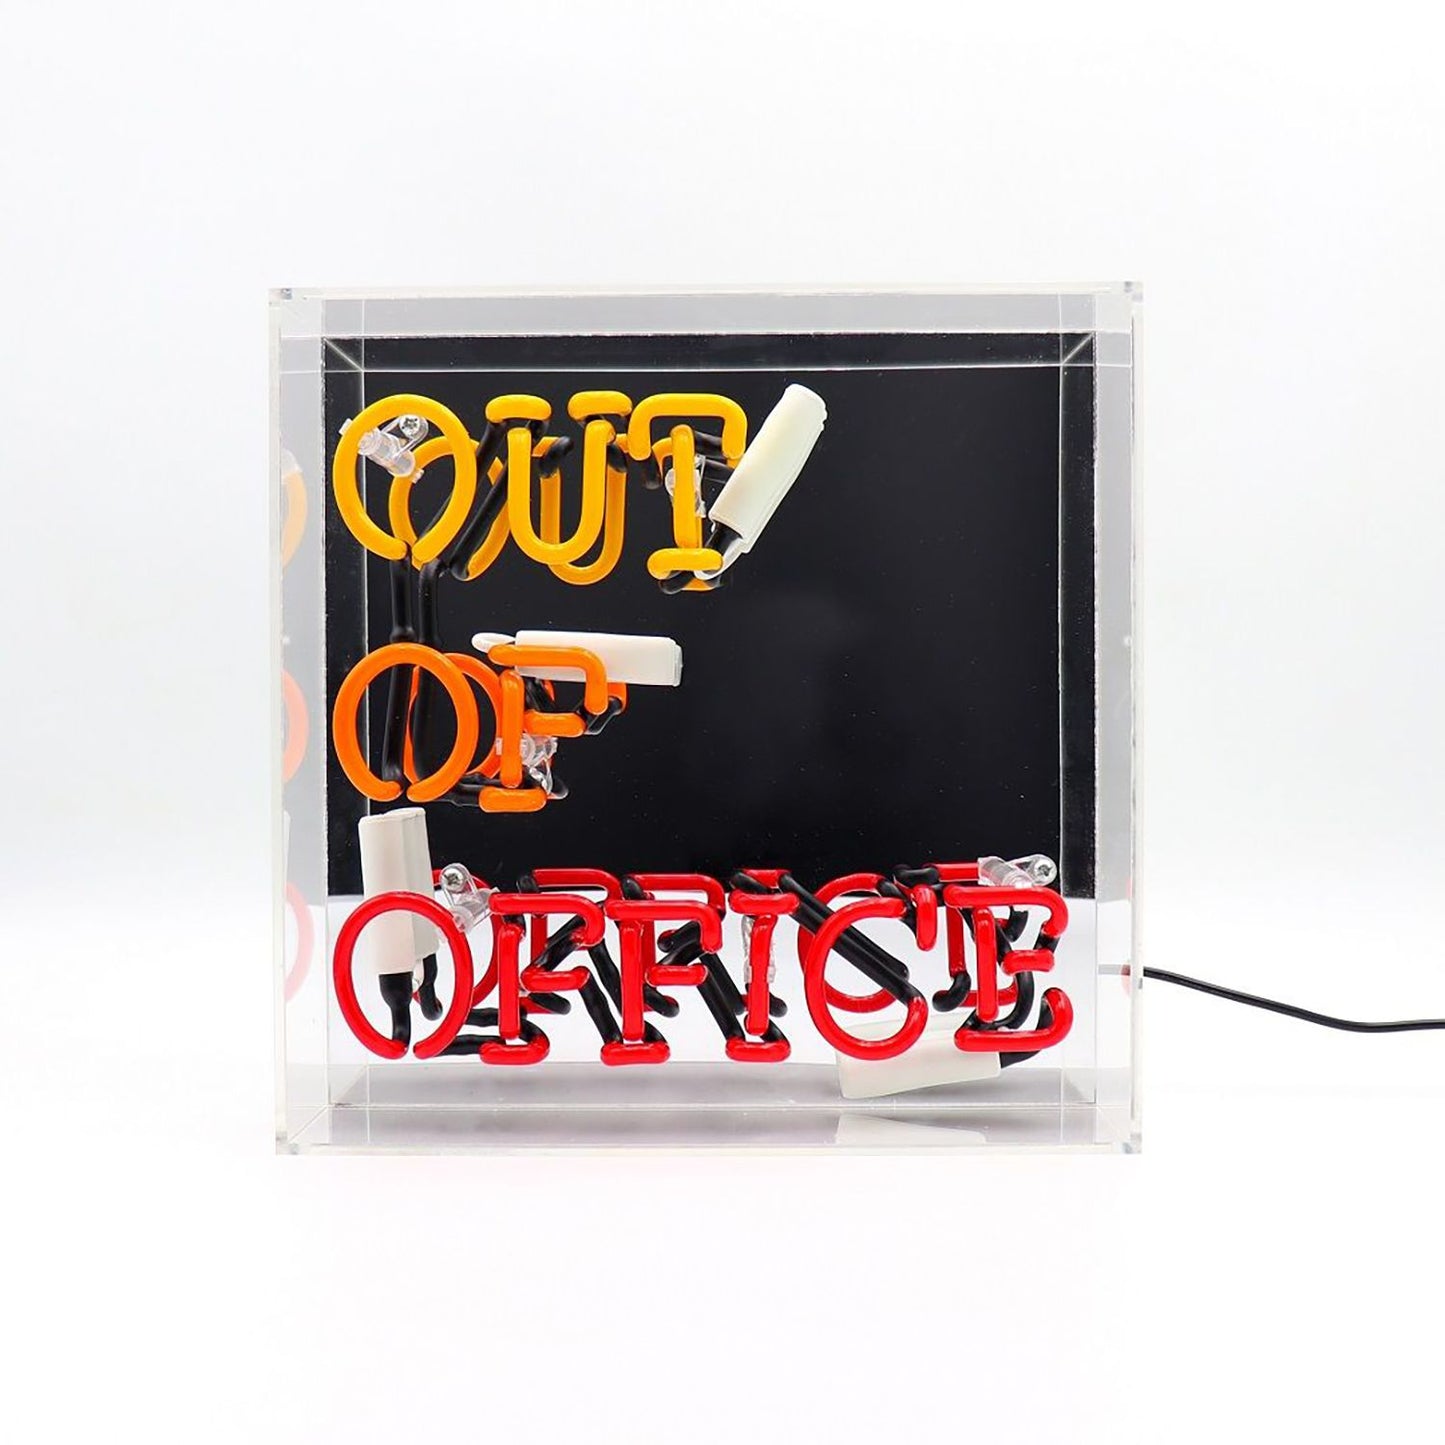 Out Of Office - Neon Light